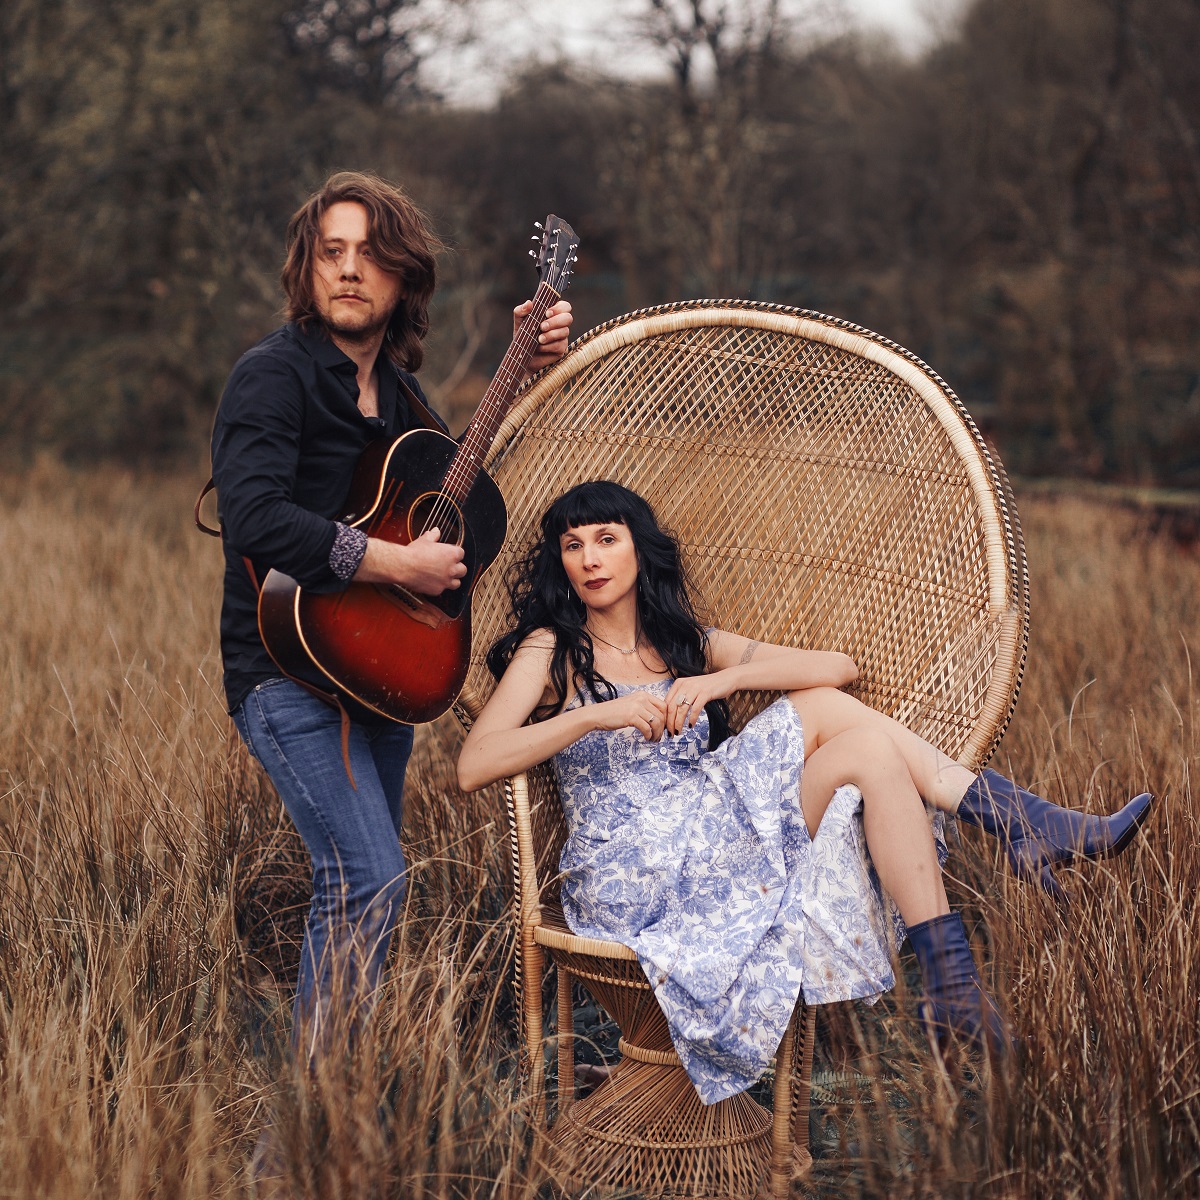 WATCH: The Lark and the Loon, 'Up on a Cloud'